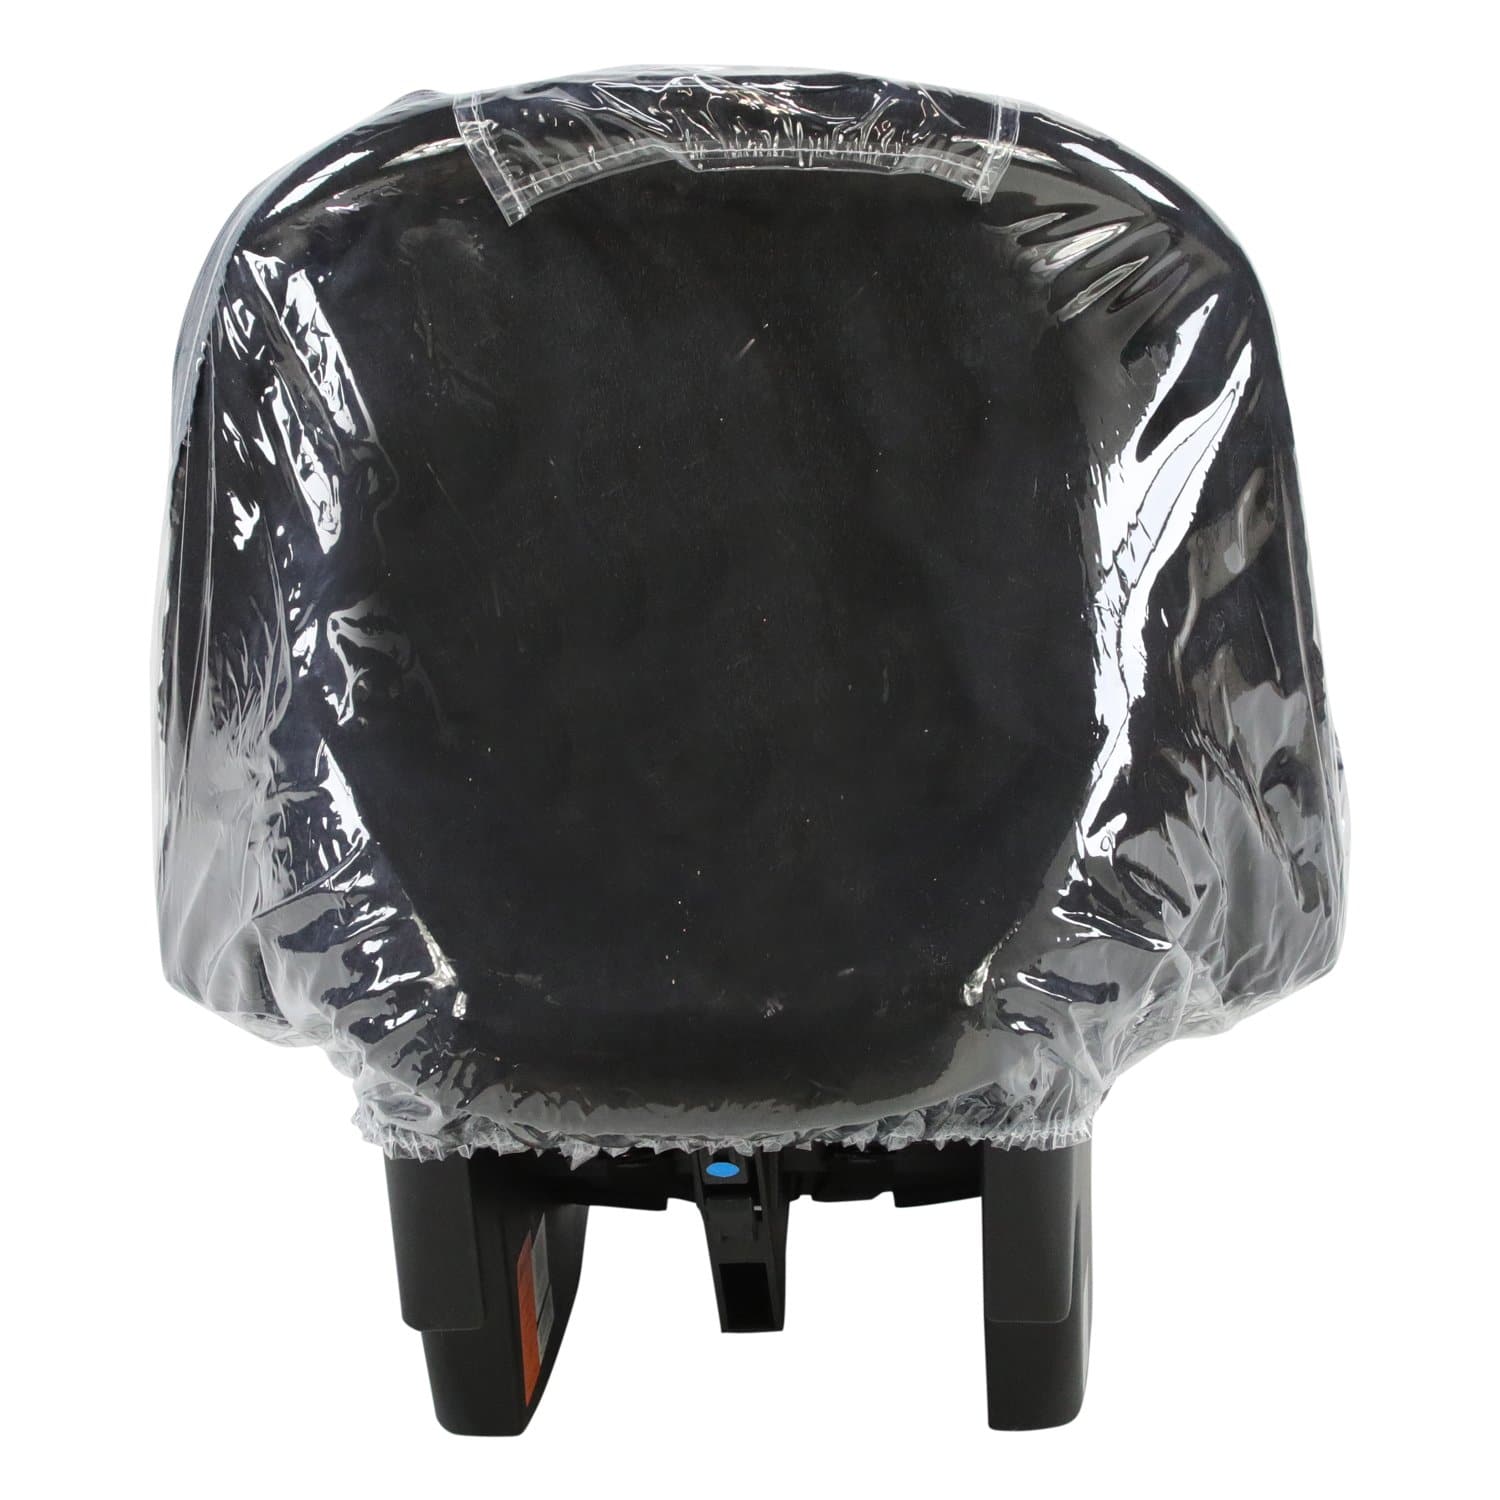 Universal Car Seat Raincover - Fits All Models - For Your Little One